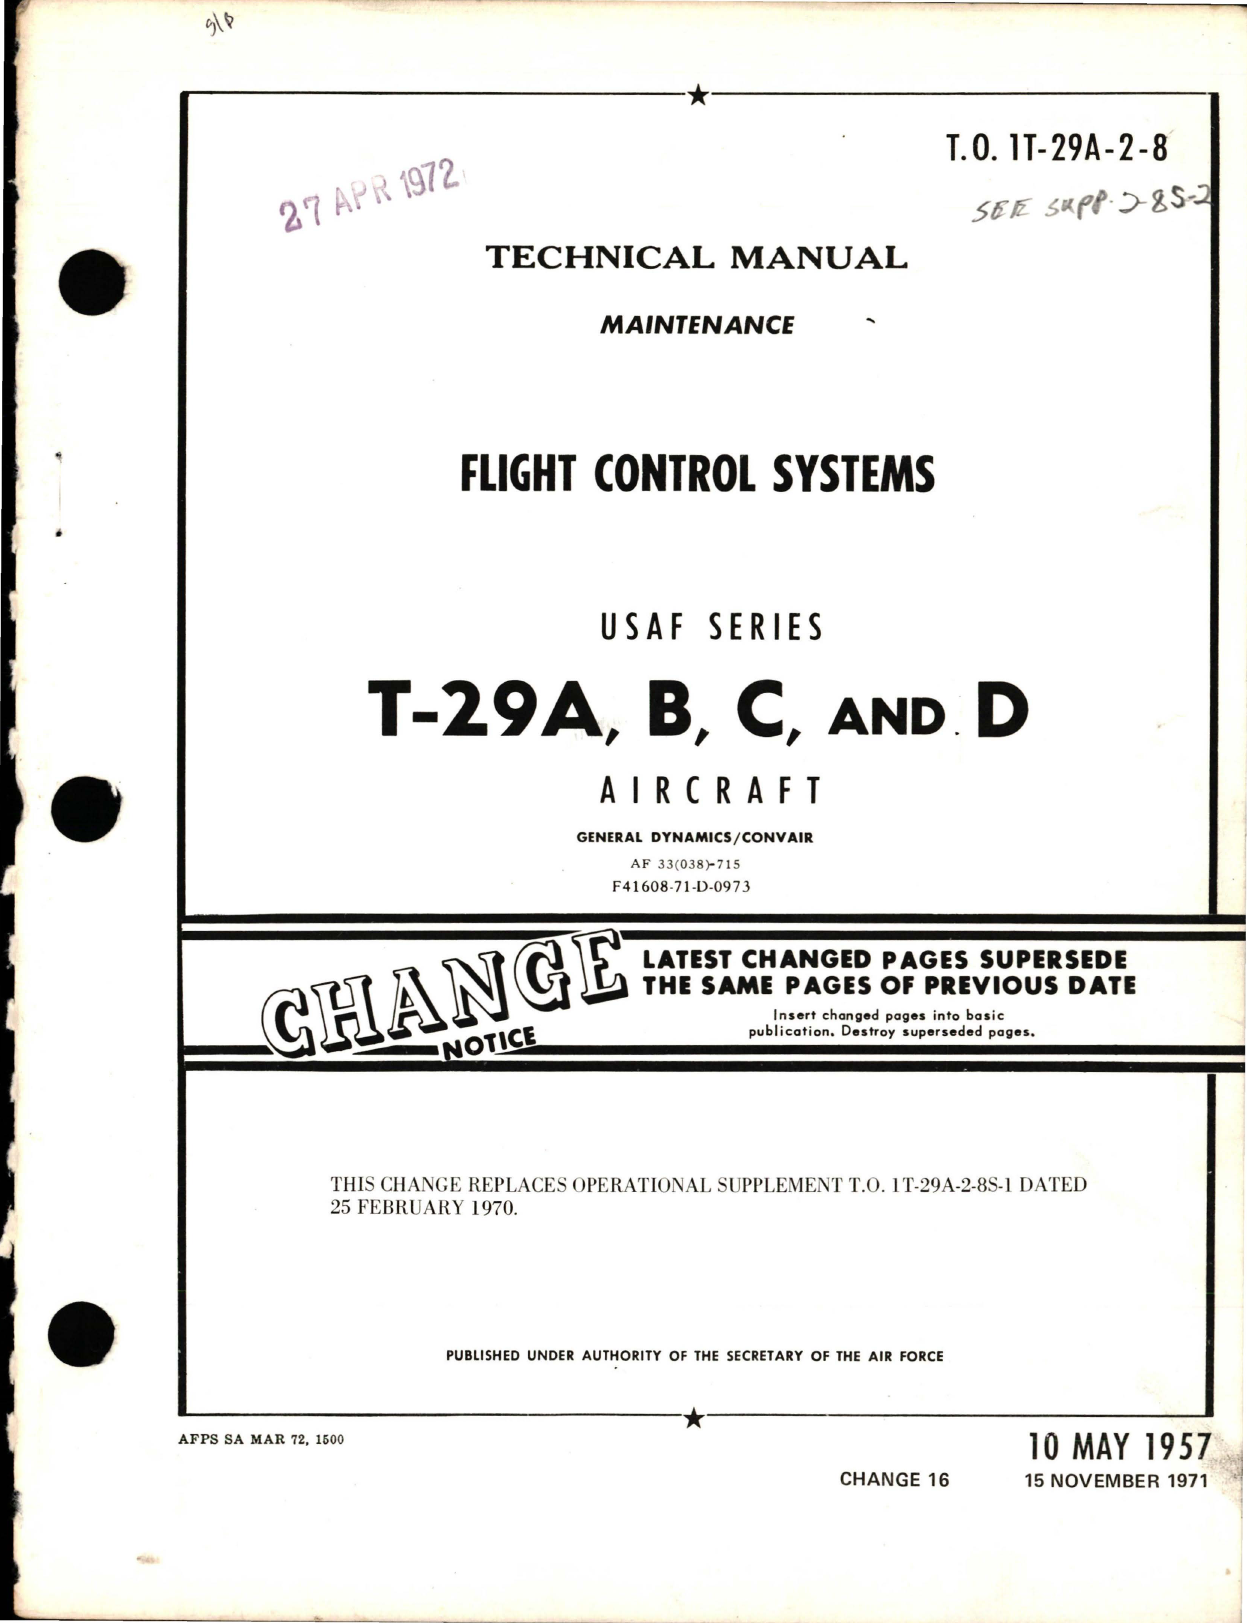 Sample page 1 from AirCorps Library document: Maintenance Manual for Flight Control Systems - T-29A, T-29B, T-29C and T-29D